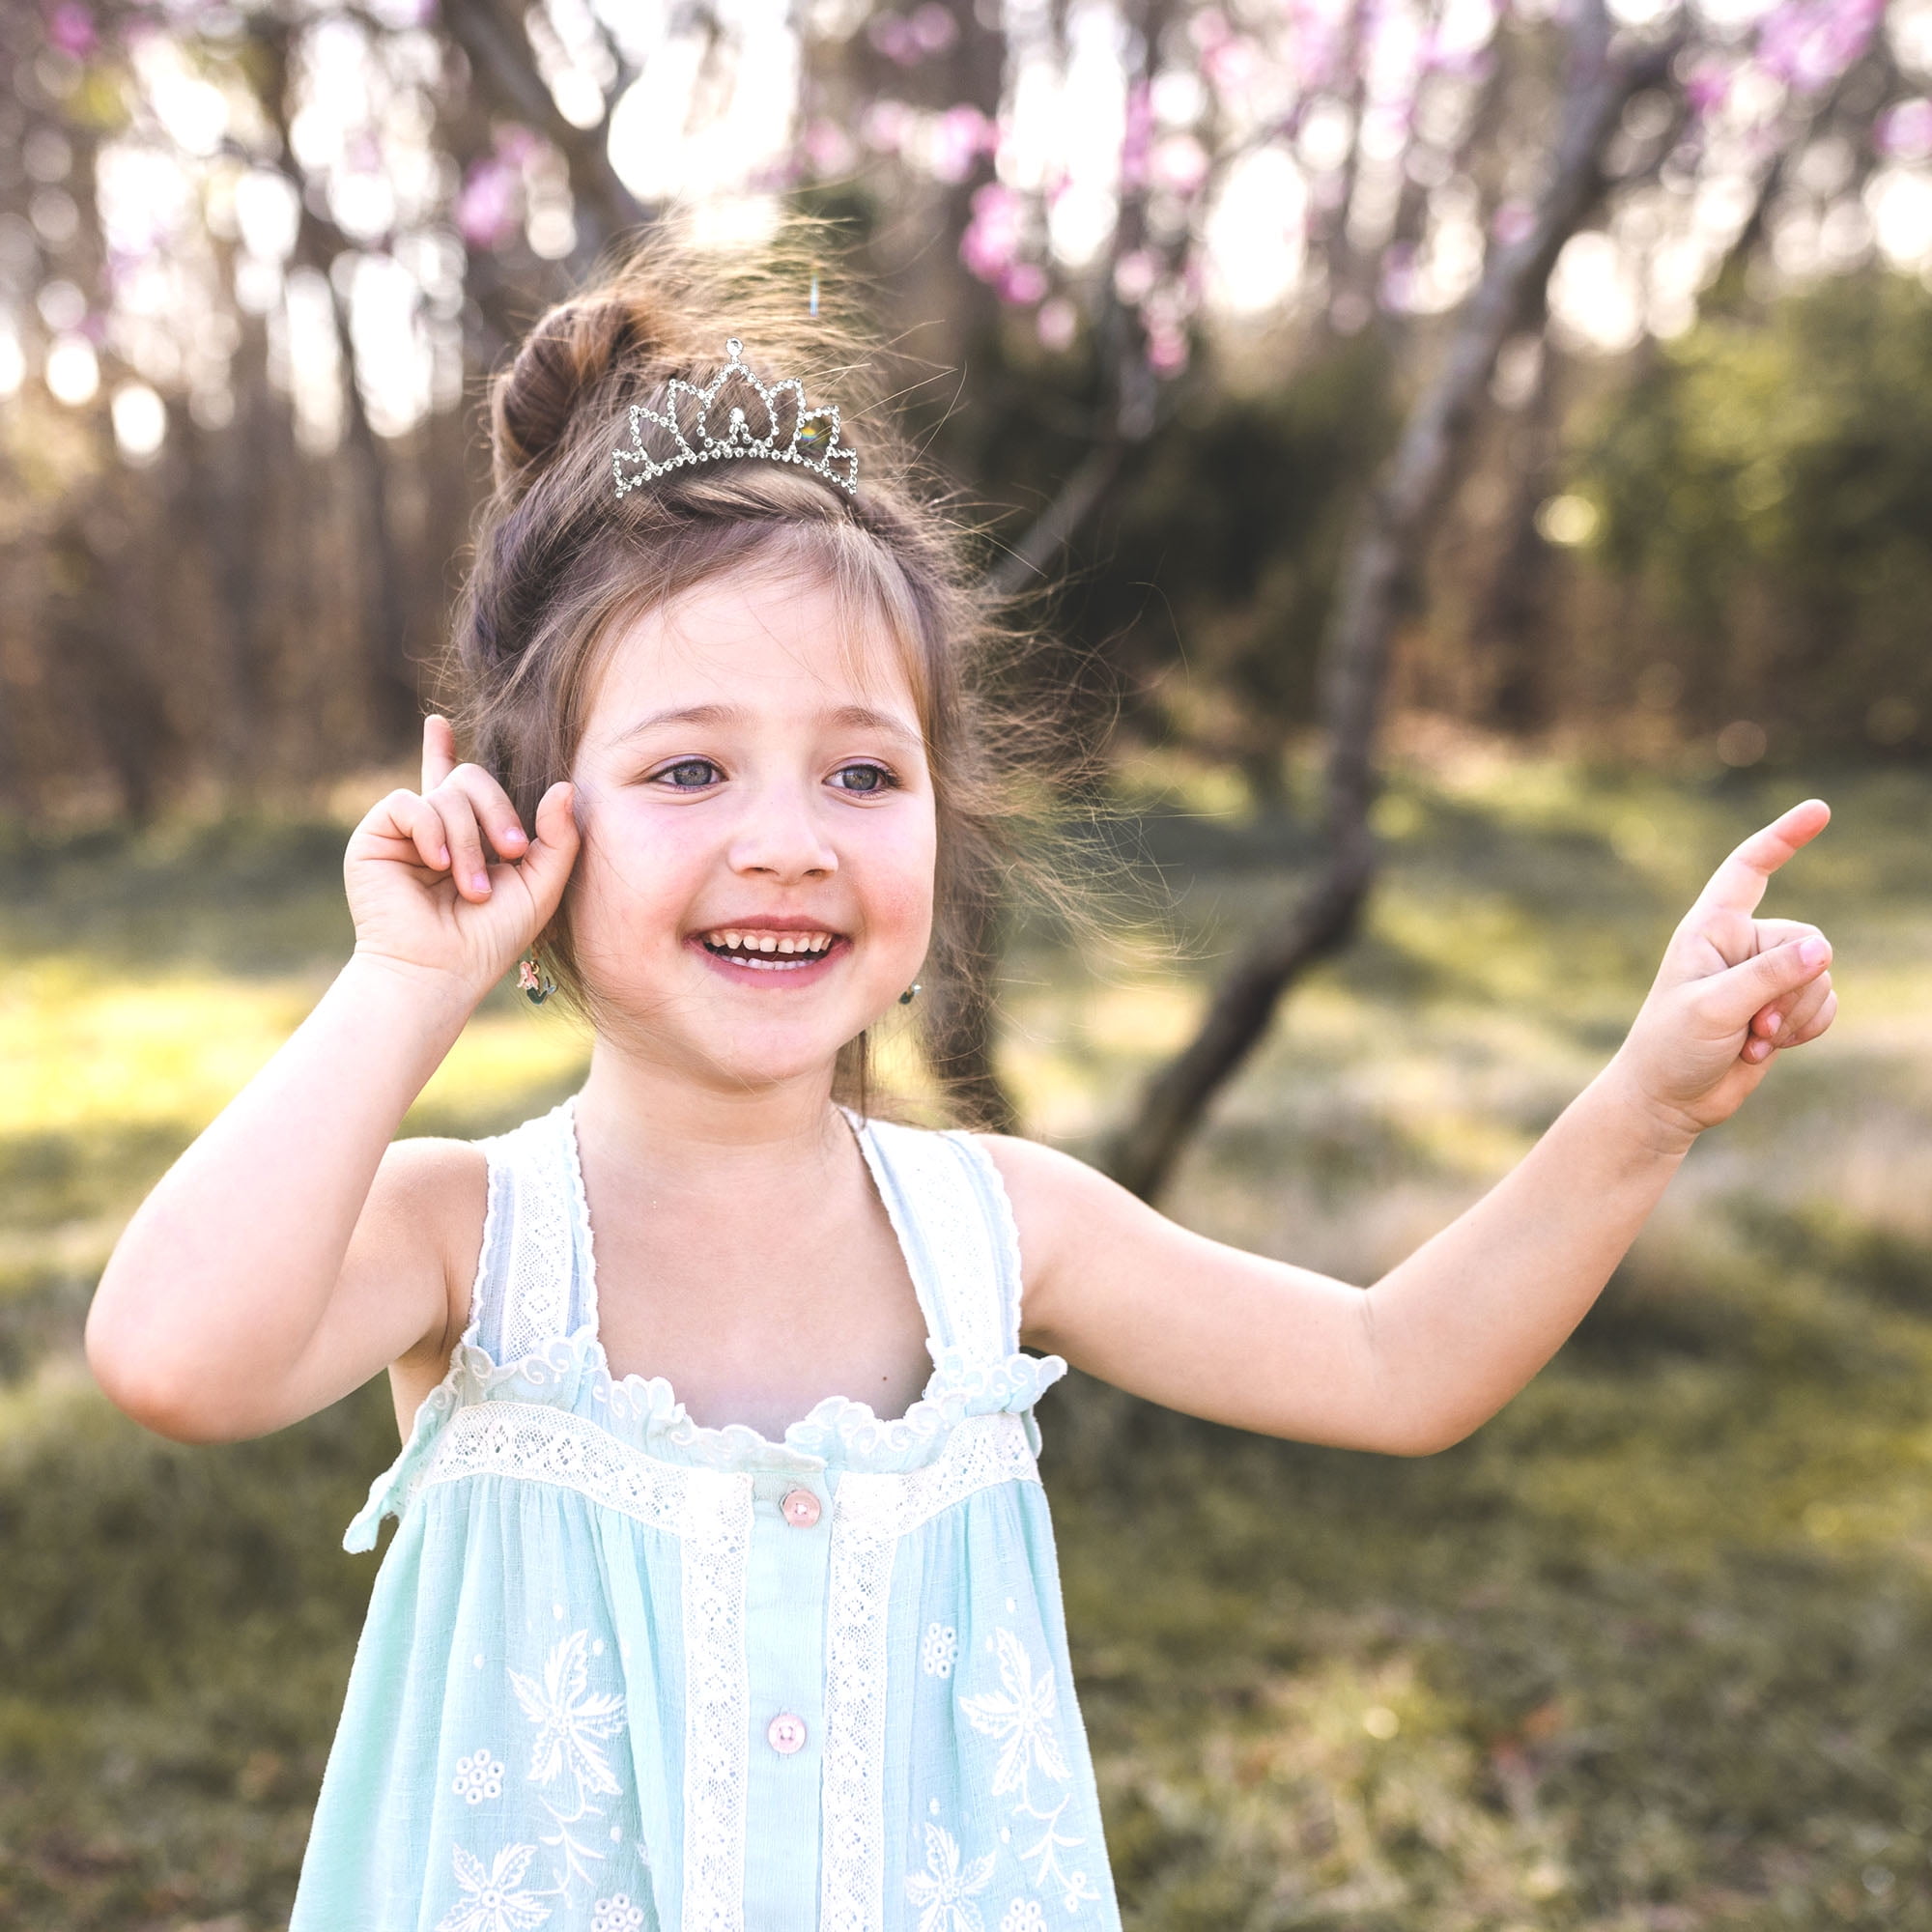 Butterfly Craze Princess Crown Comb Mini Tiara for Kids - Ideal for Wedding  Entourage like Flower Girls, Add a Touch of Royalty to Your Child's